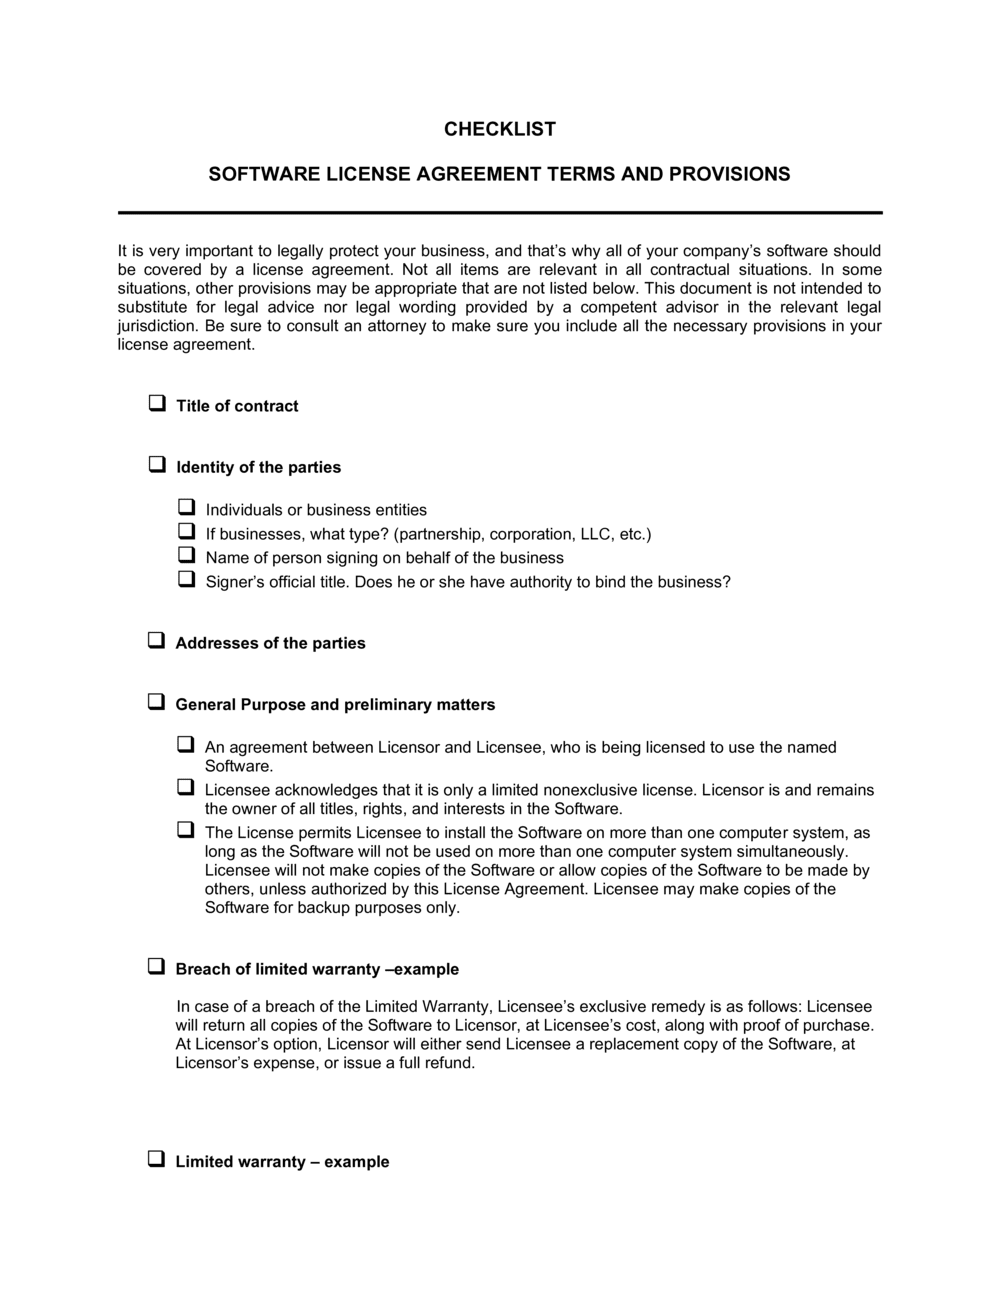 Checklist Software License Agreement Provisions Template  by For software warranty agreement template